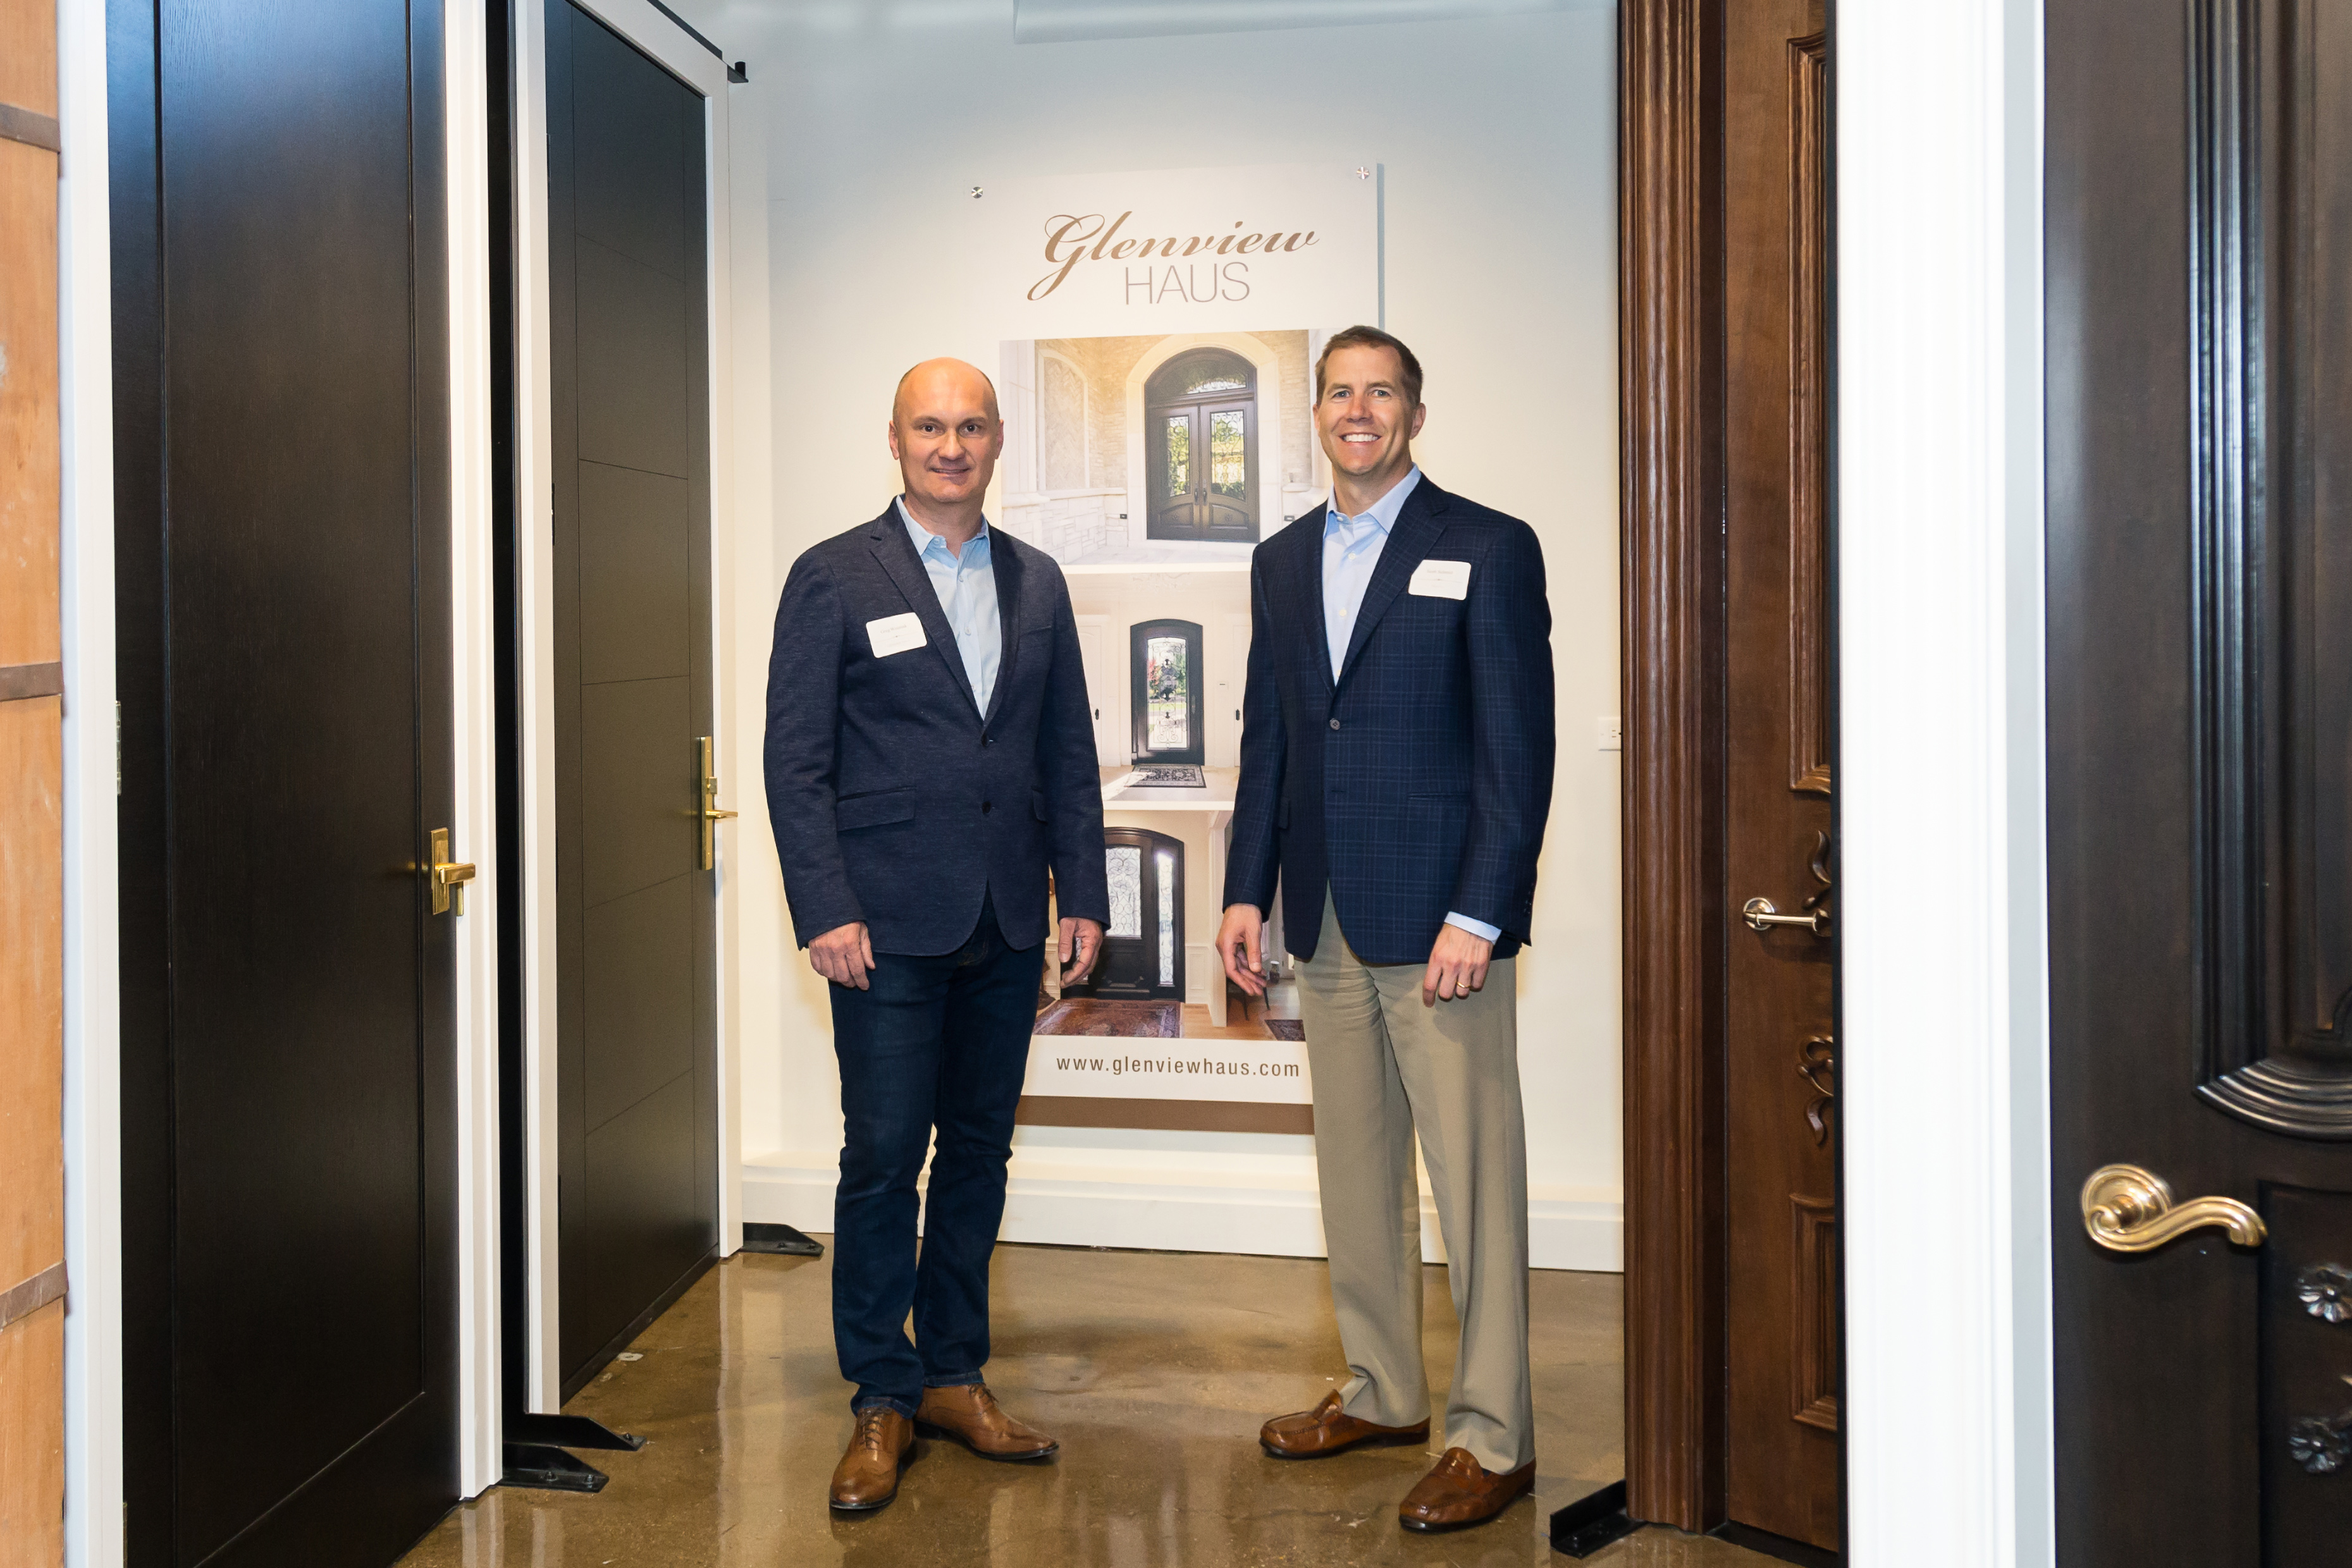 Wozniak and Schmid share a vision of custom doors at the forefront of interior design